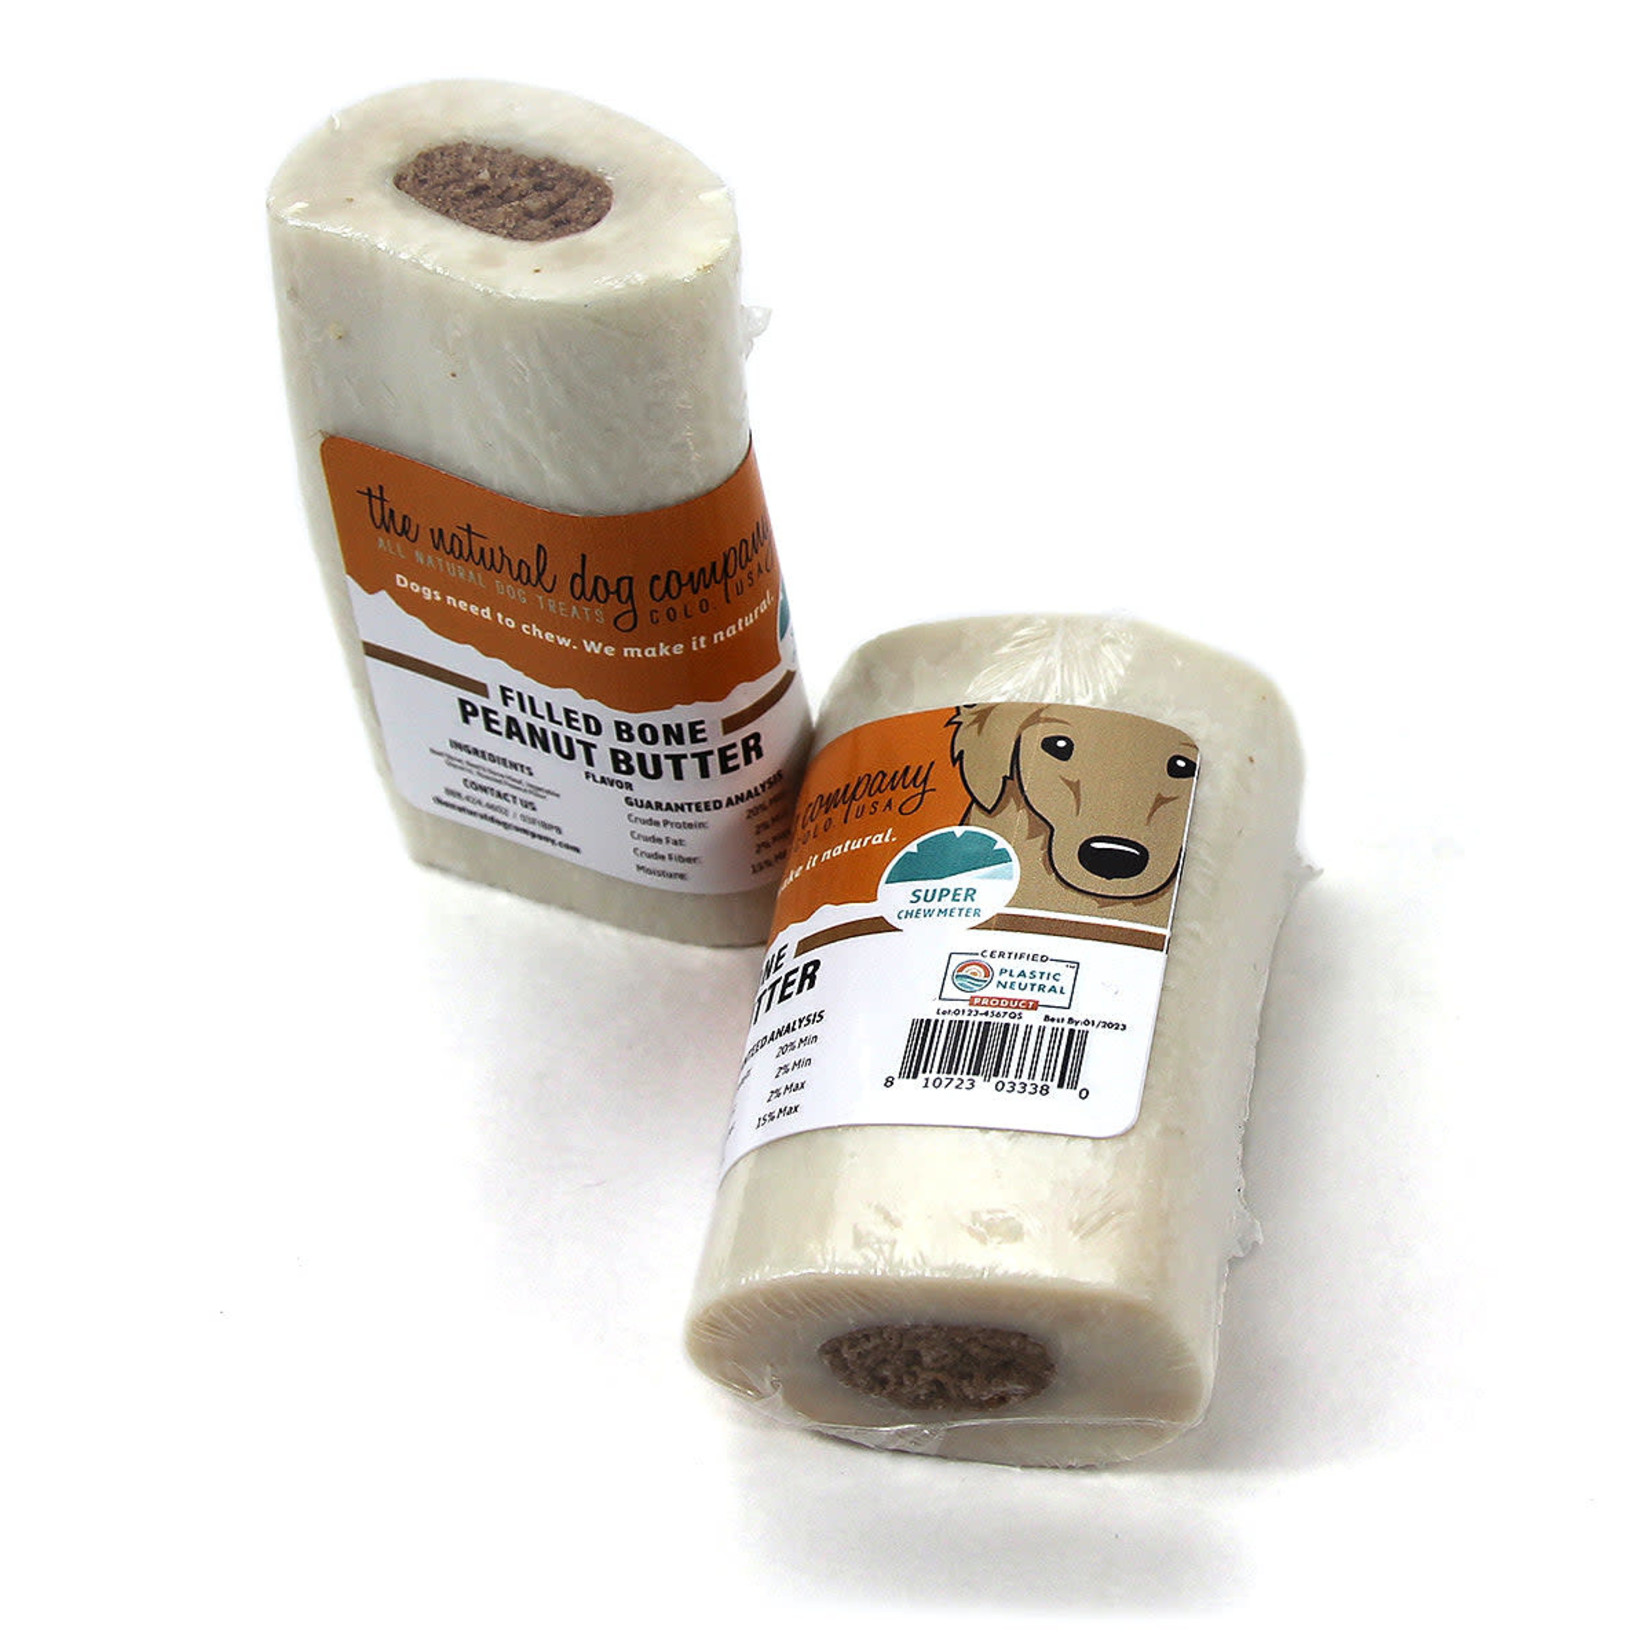 Tuesday's Natural Dog Company The Natural Dog Company | Filled Bone - Peanut Butter Flavor